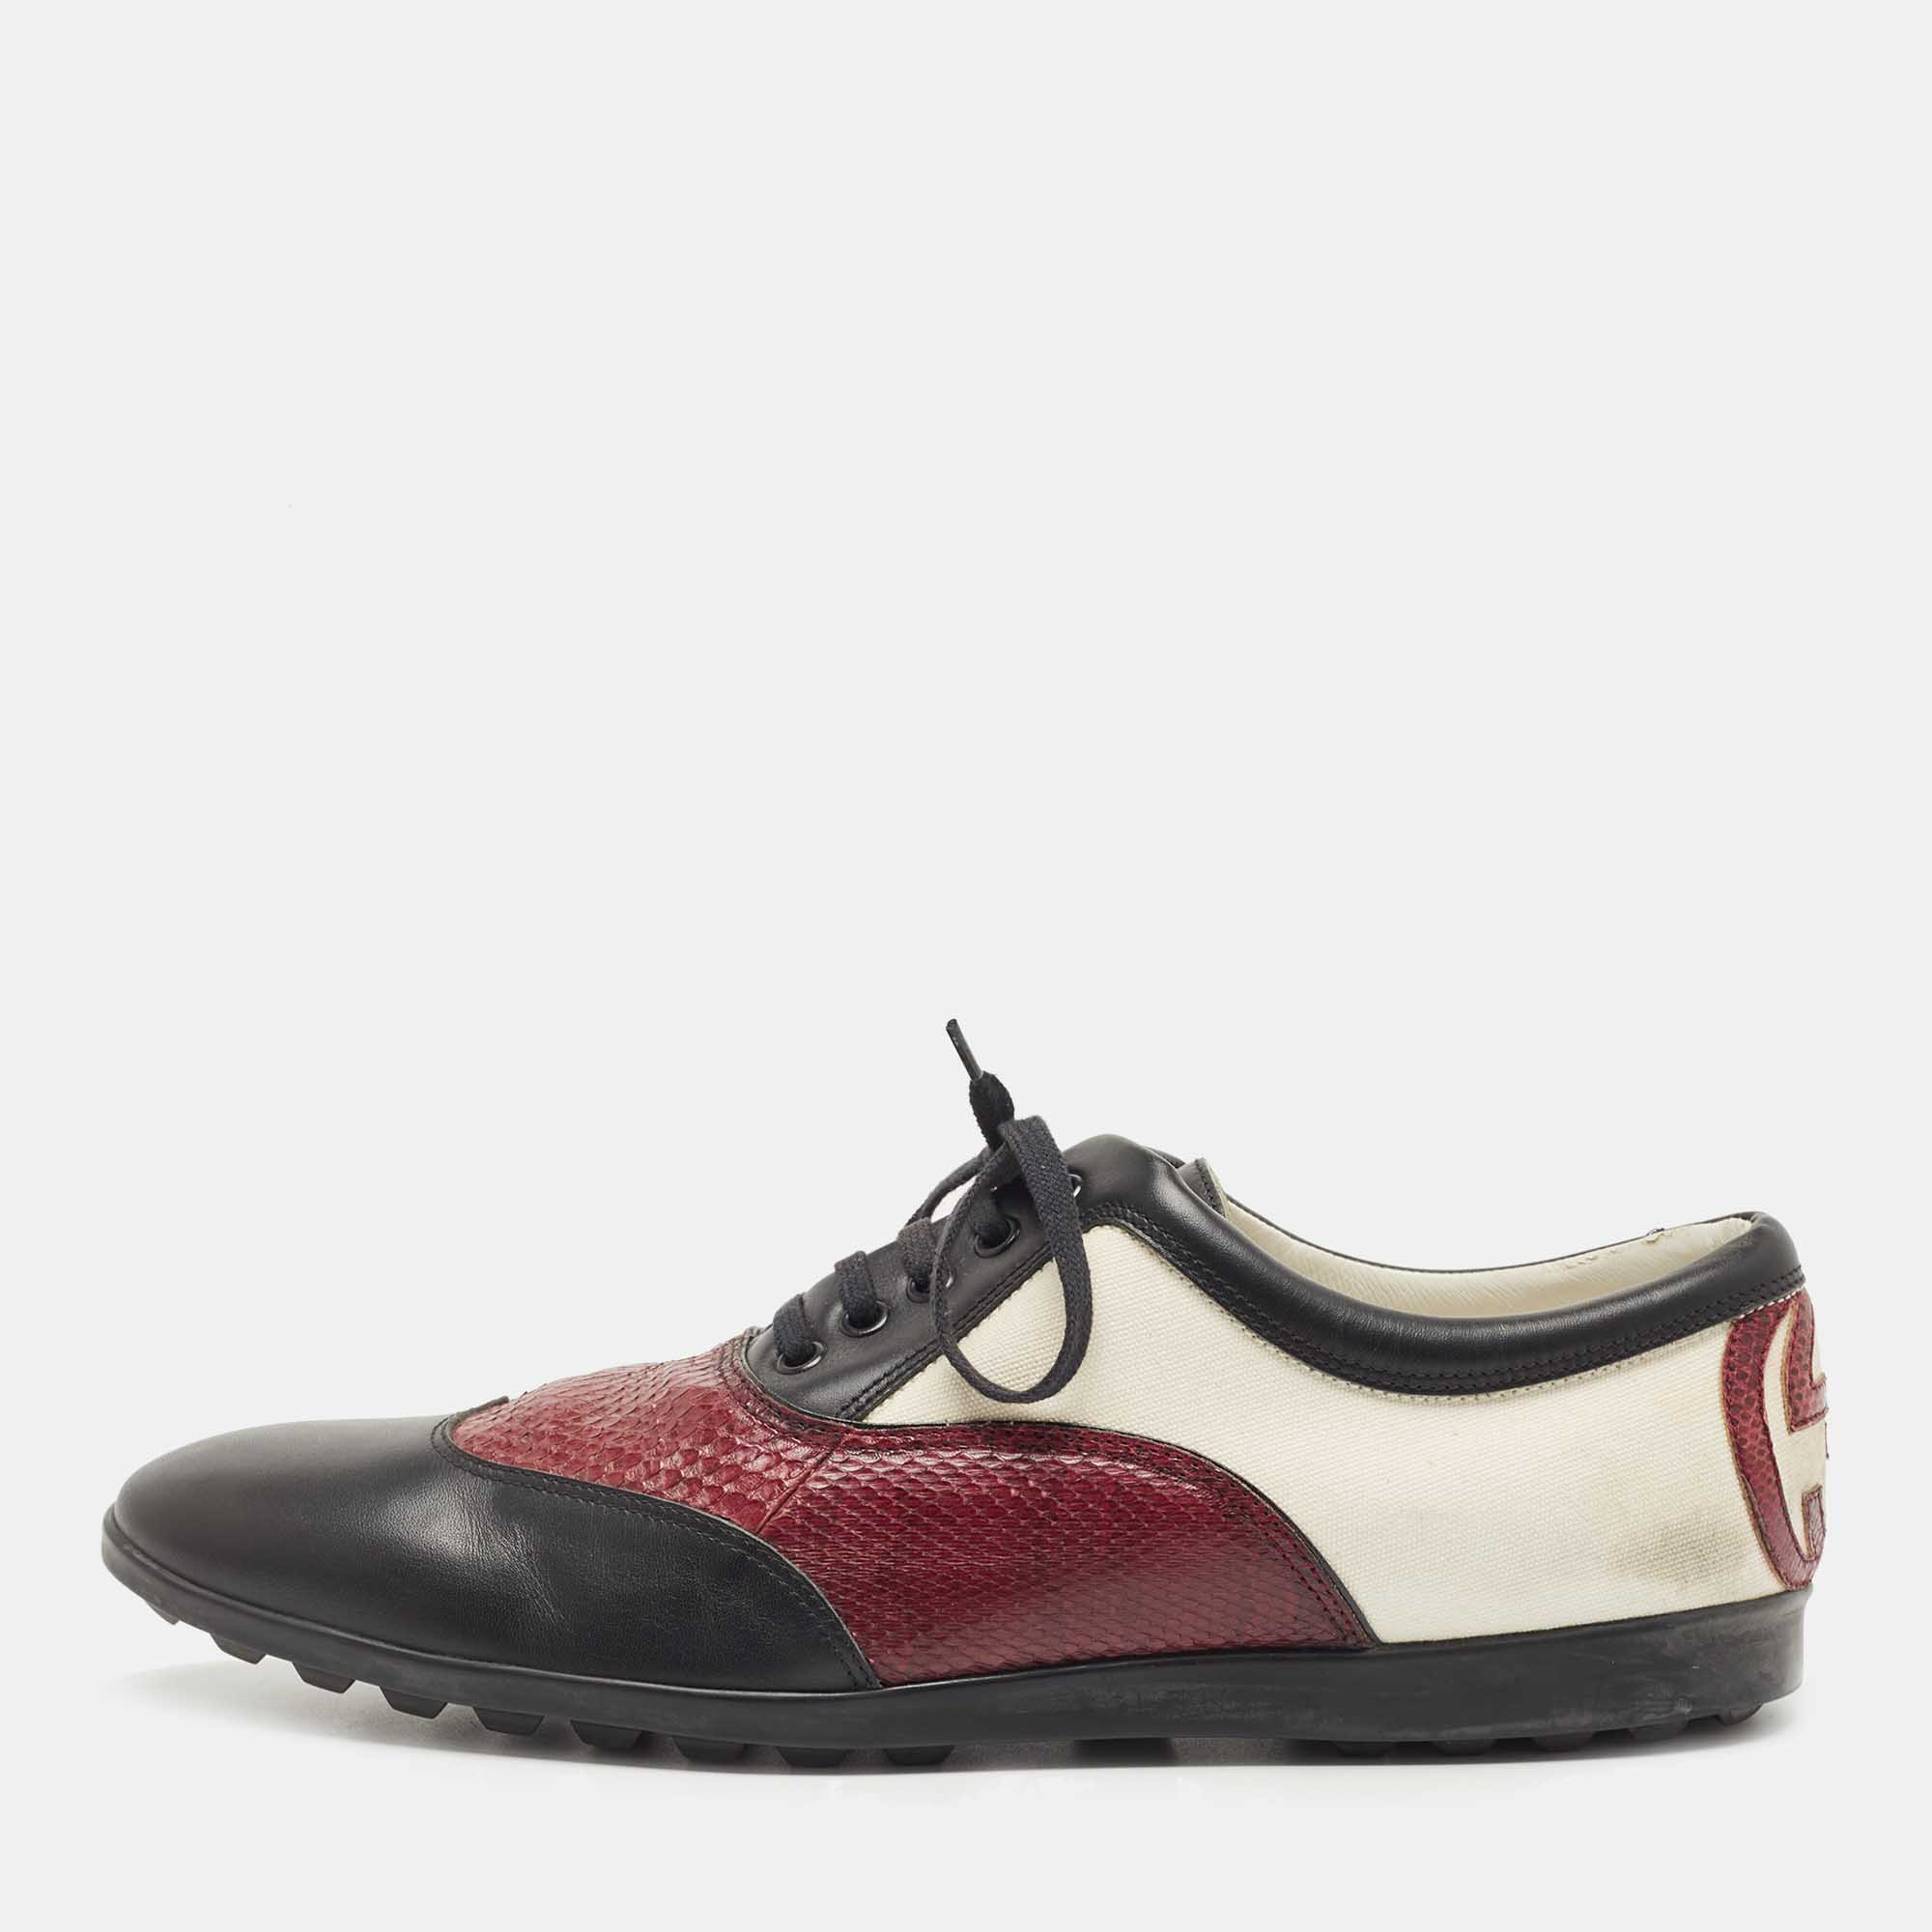 Let this comfortable pair be your first choice when youre out for a long day. These Gucci Oxford sneakers have well sewn uppers beautifully set on durable soles.